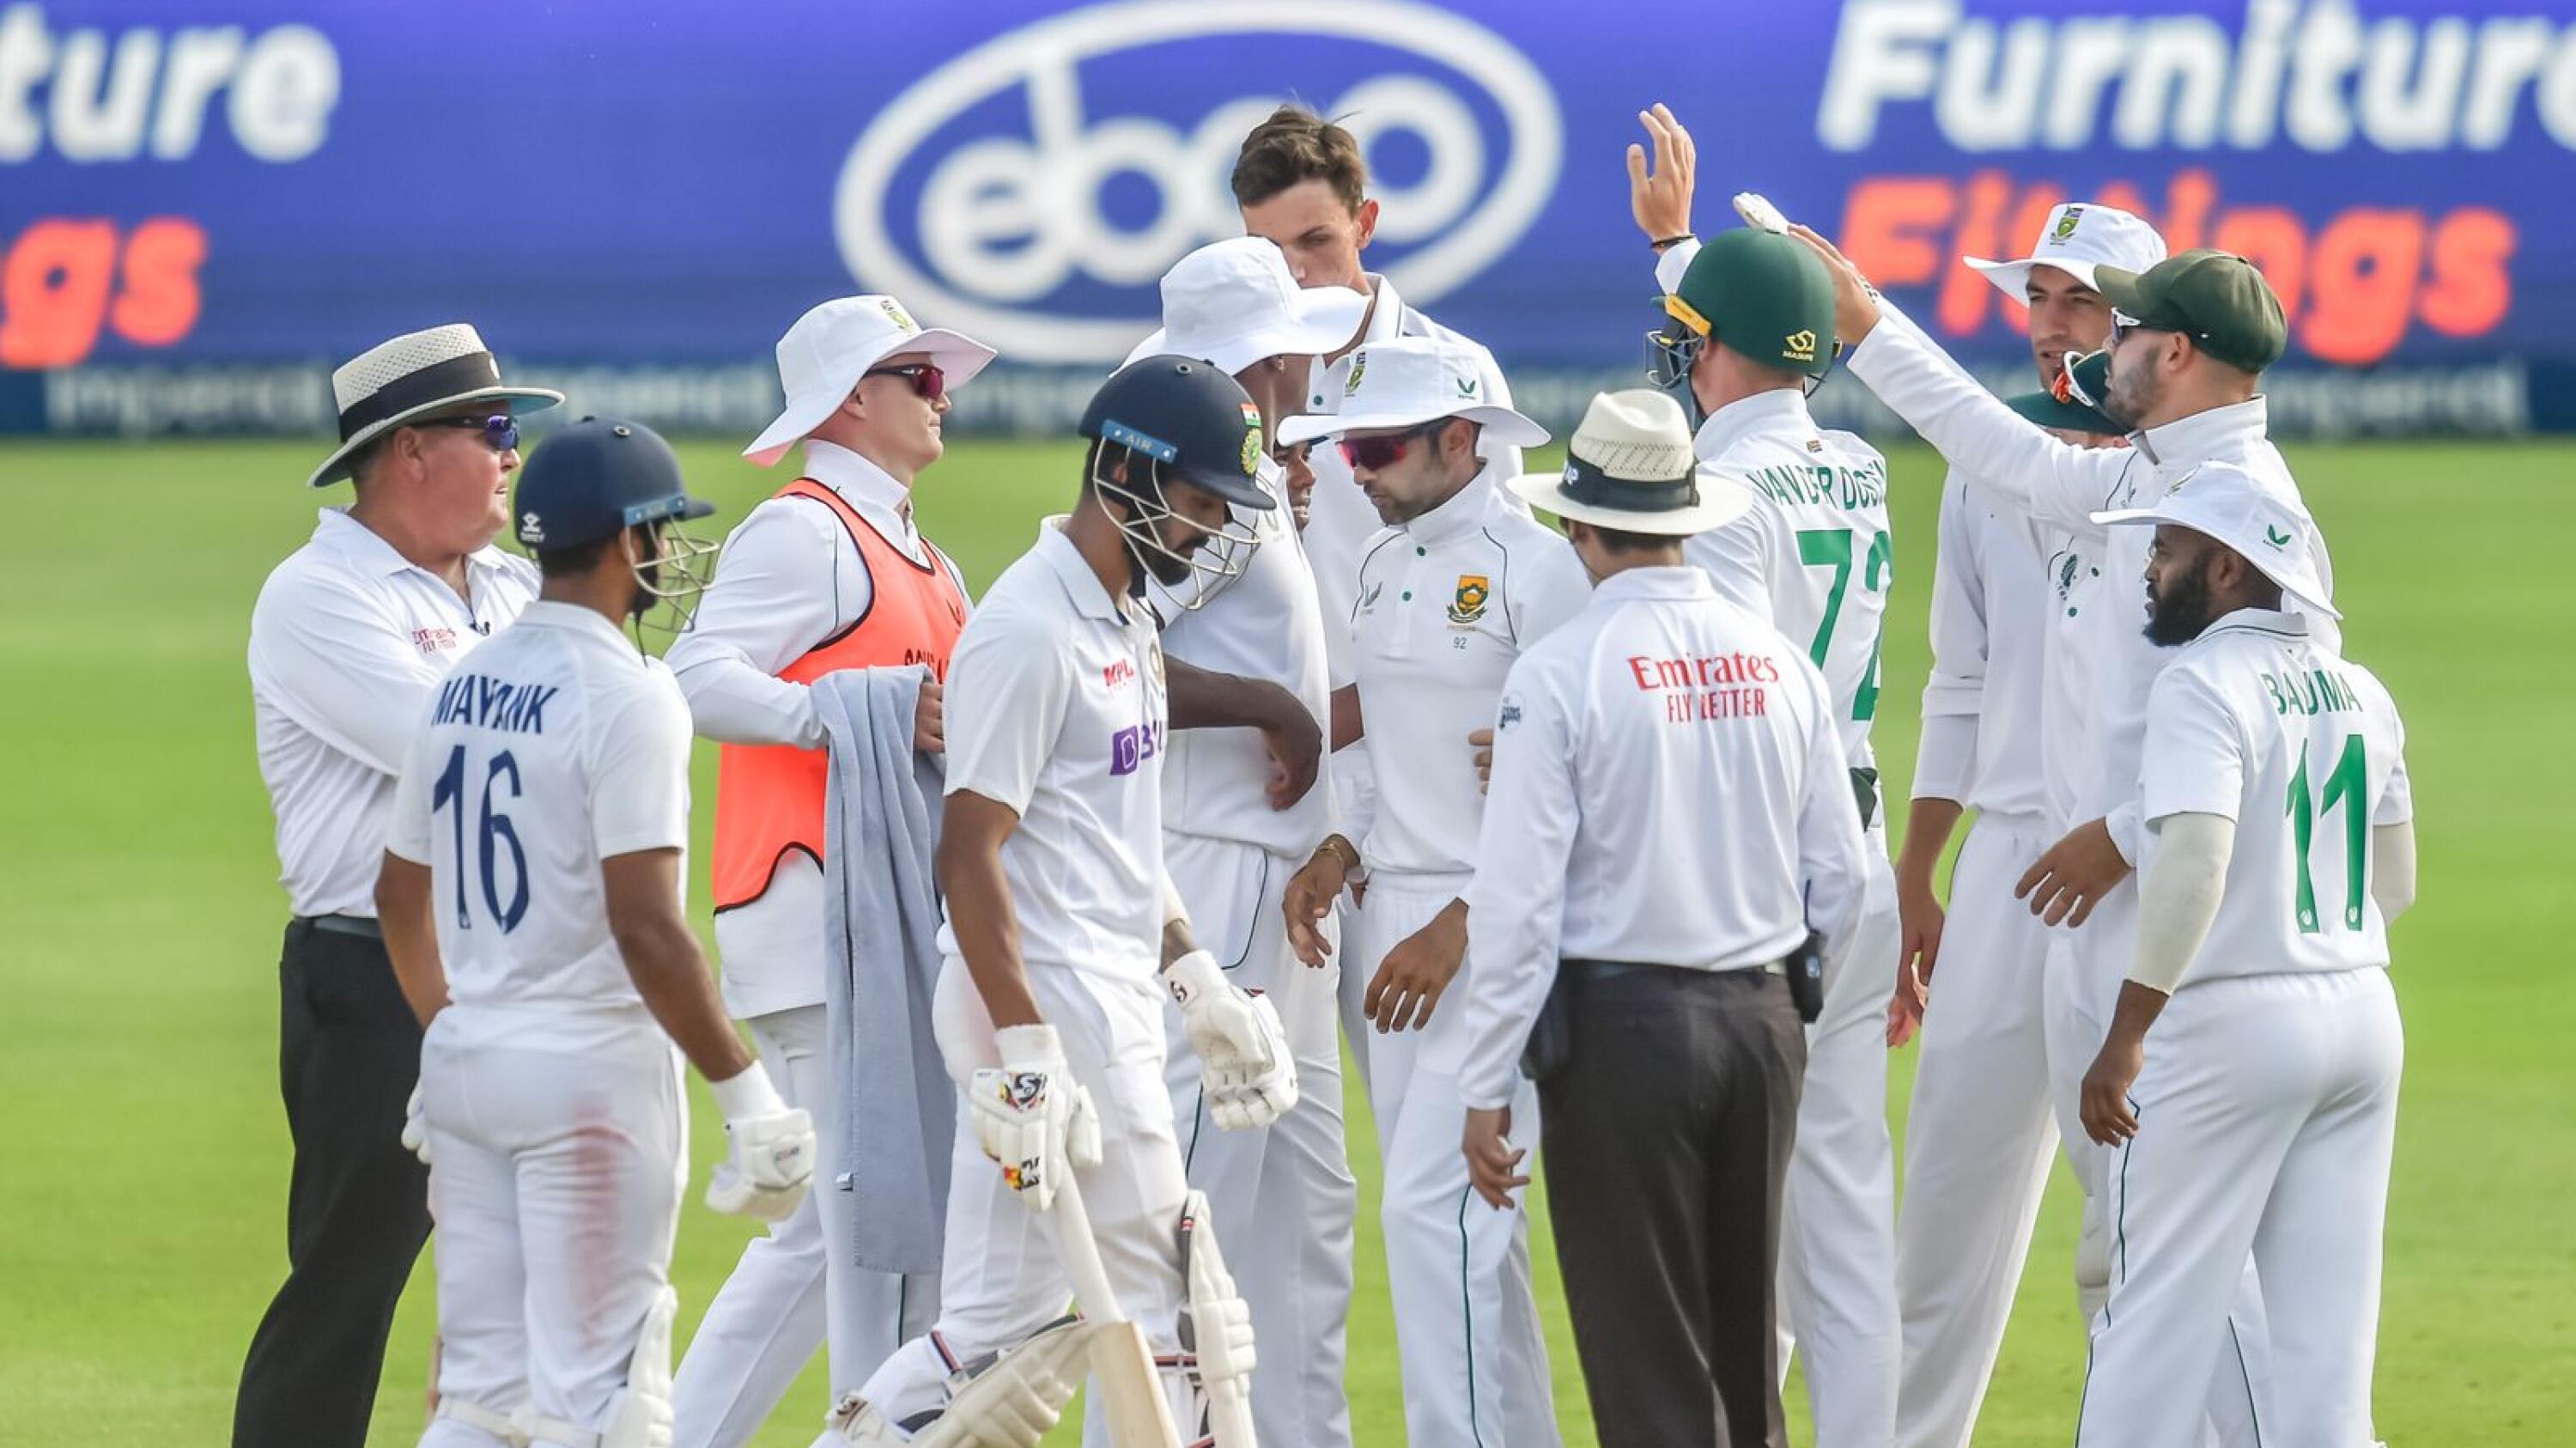 KL Rahul of India walks of after the umpires checked with the third umpire for a caught behind during India’s second Innings on day 2 of the 2nd Test against South Africa at the Wanderers in Johannesburg on Tuesday